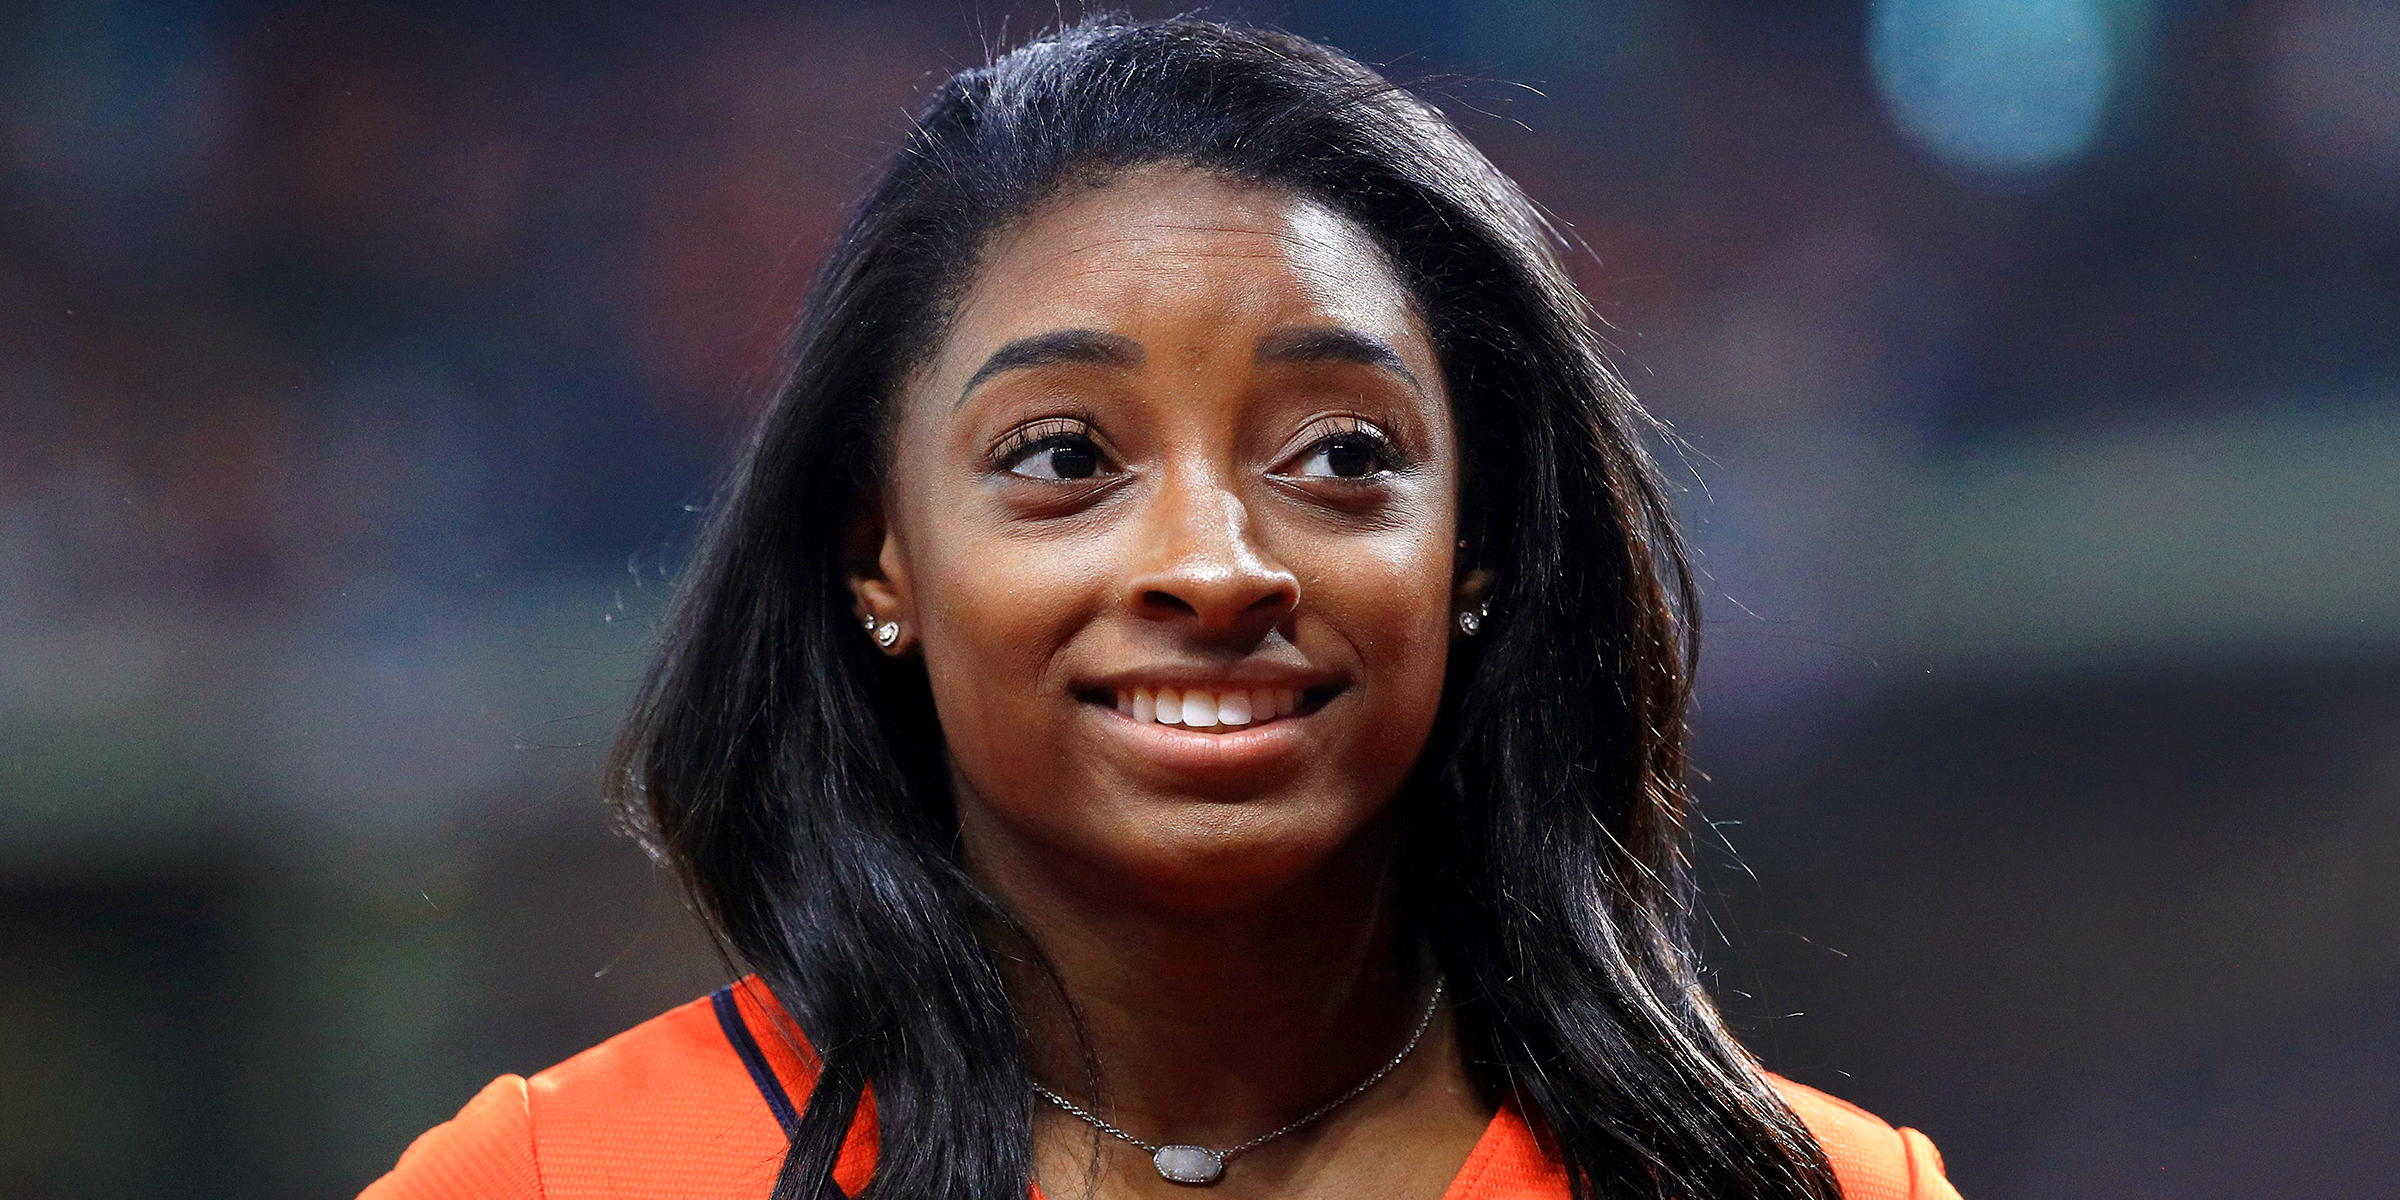 Simone Biles | Source: Getty Images